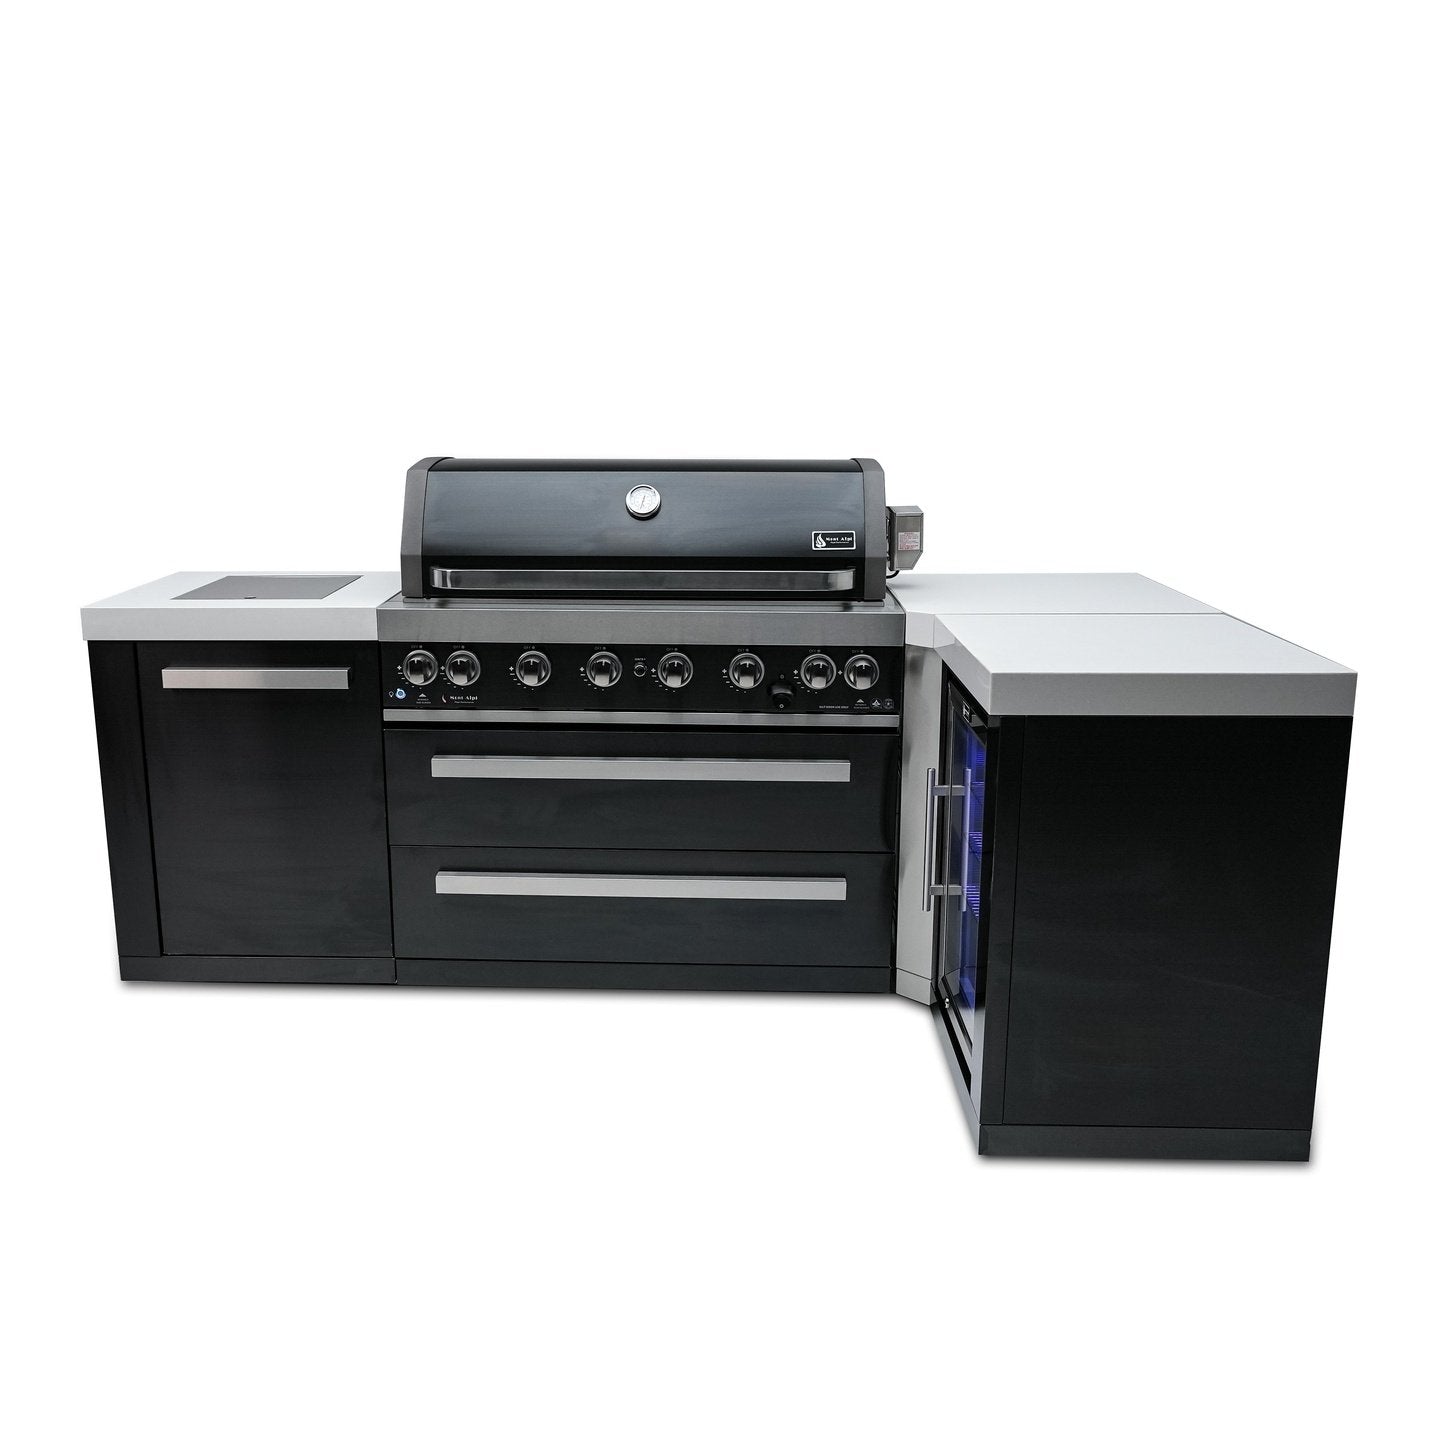 Mont Alpi L Shaped Grill Island with 805 Deluxe Gas Grill, Outdoor Rated Fridge Cabinet, Infrared Side Burner, Black Stainless Steel - MAi805-BSS90FC